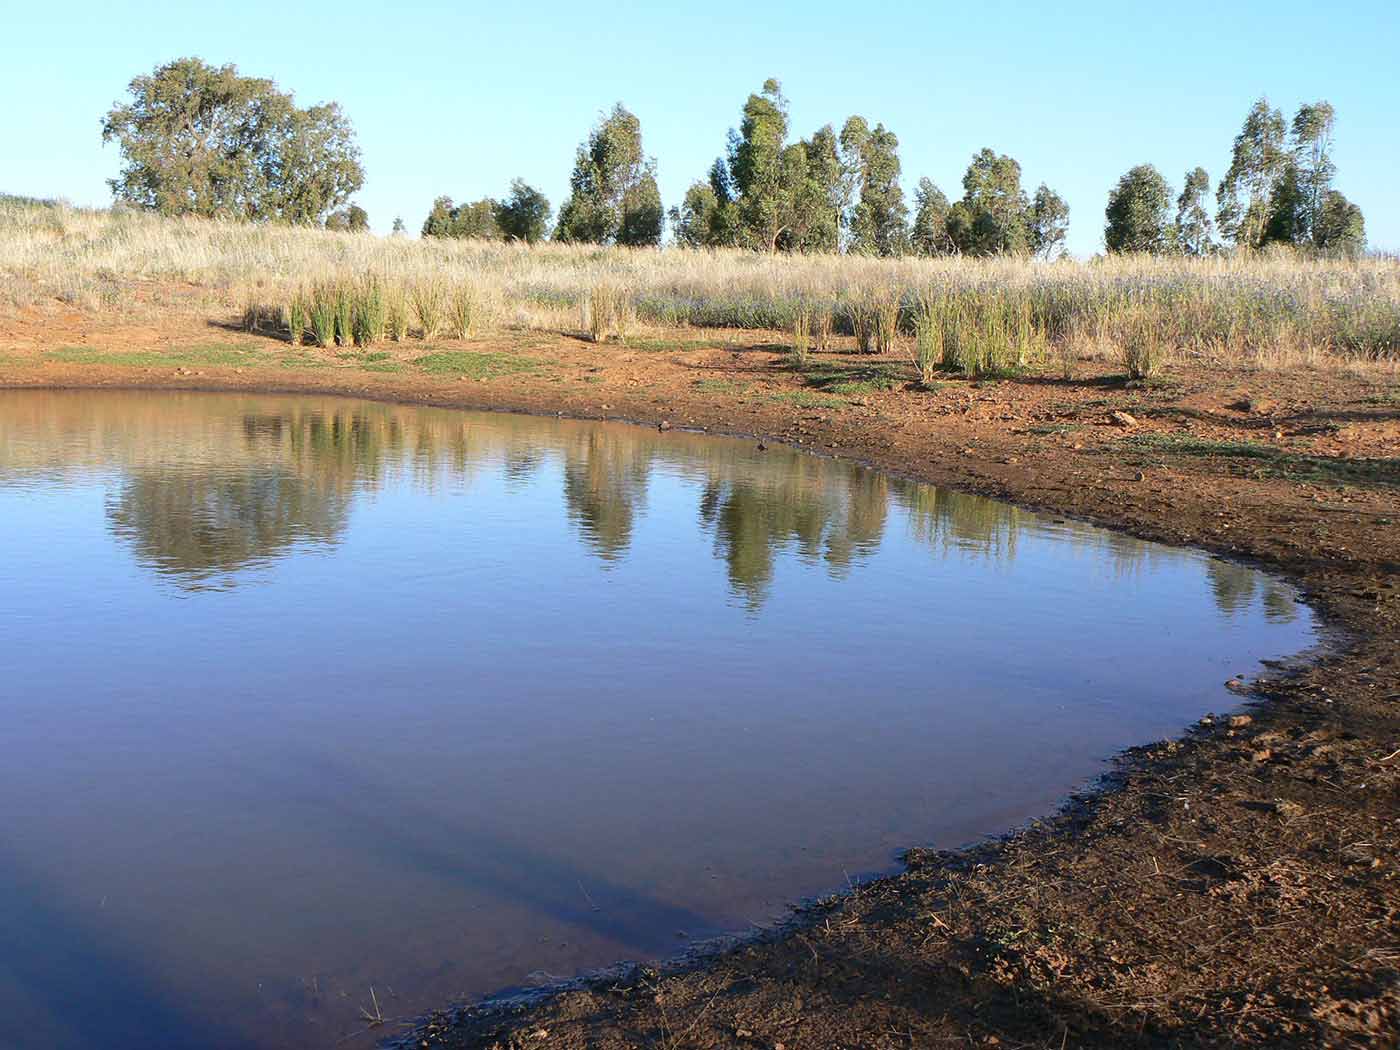 Australian farmland featuring a dam filled with water and surrounded by soil with dry grasses and trees in the background.